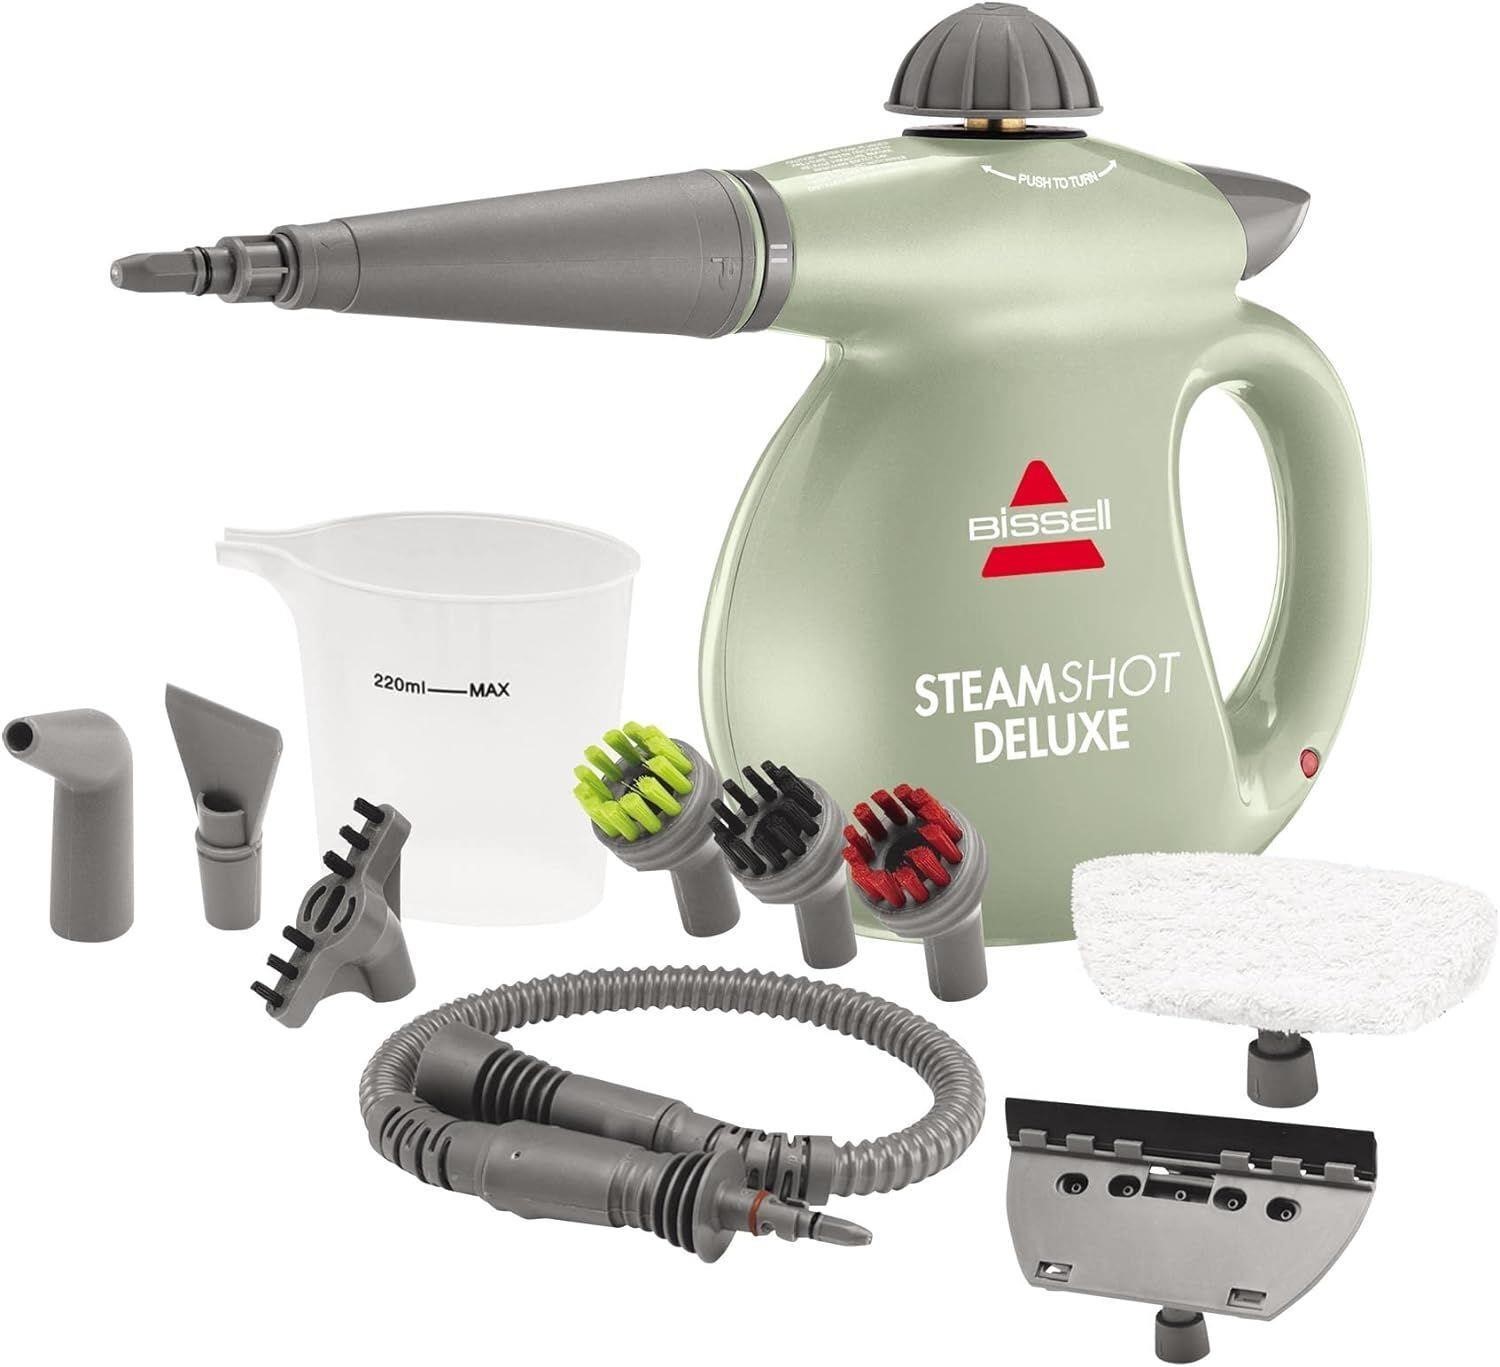 BISSELL SteamShot Deluxe Hard Surface Steam Clean